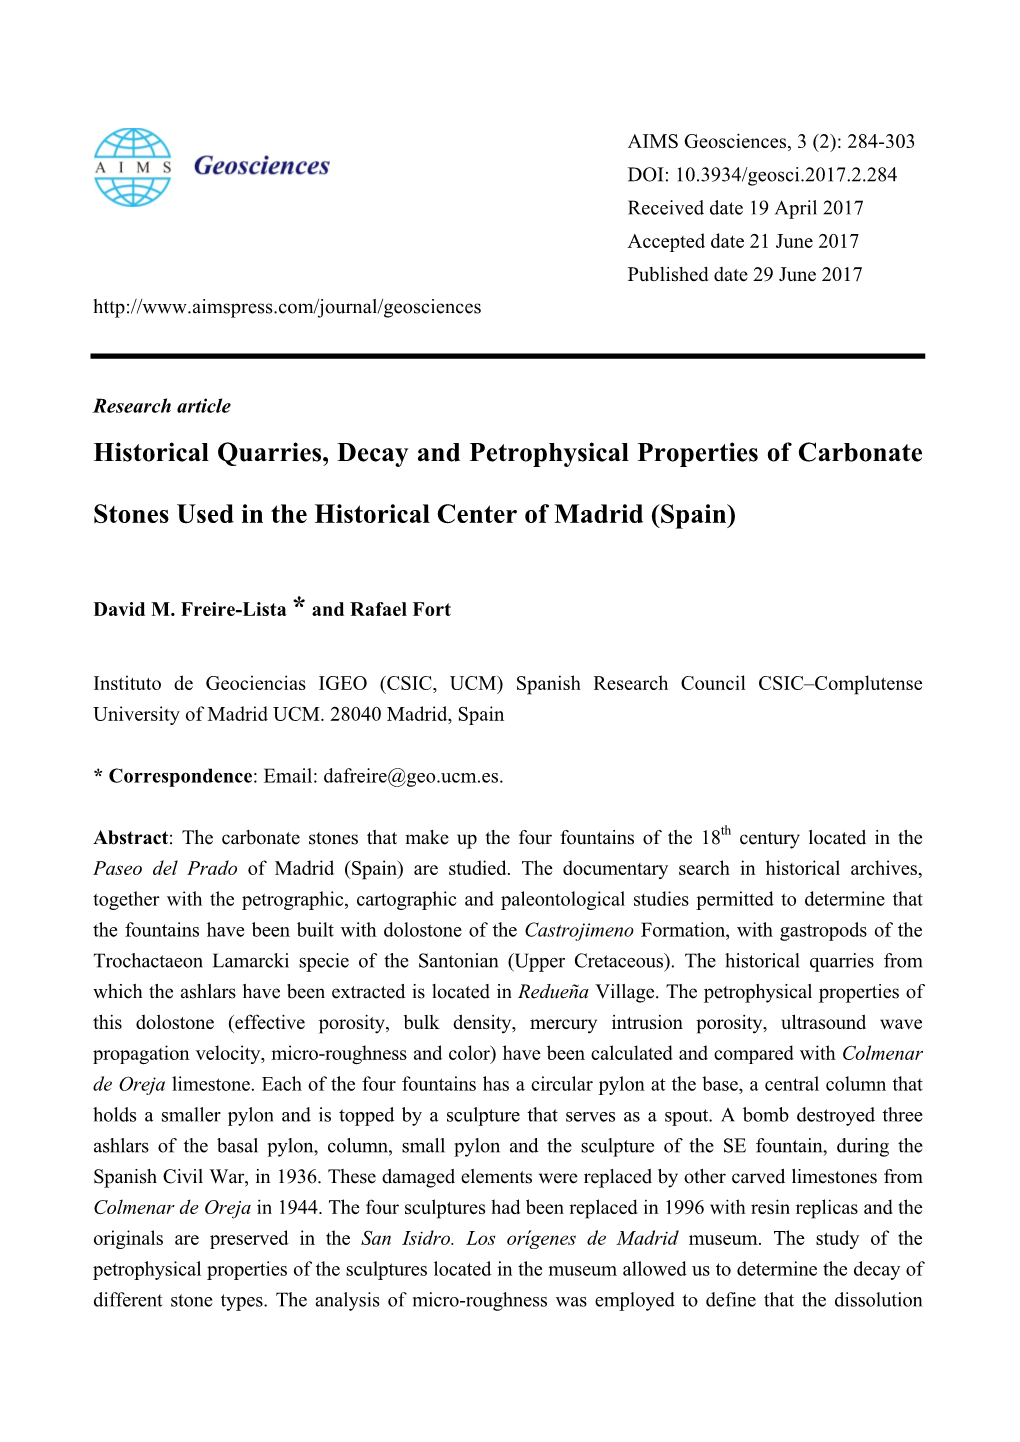 Historical Quarries, Decay and Petrophysical Properties of Carbonate